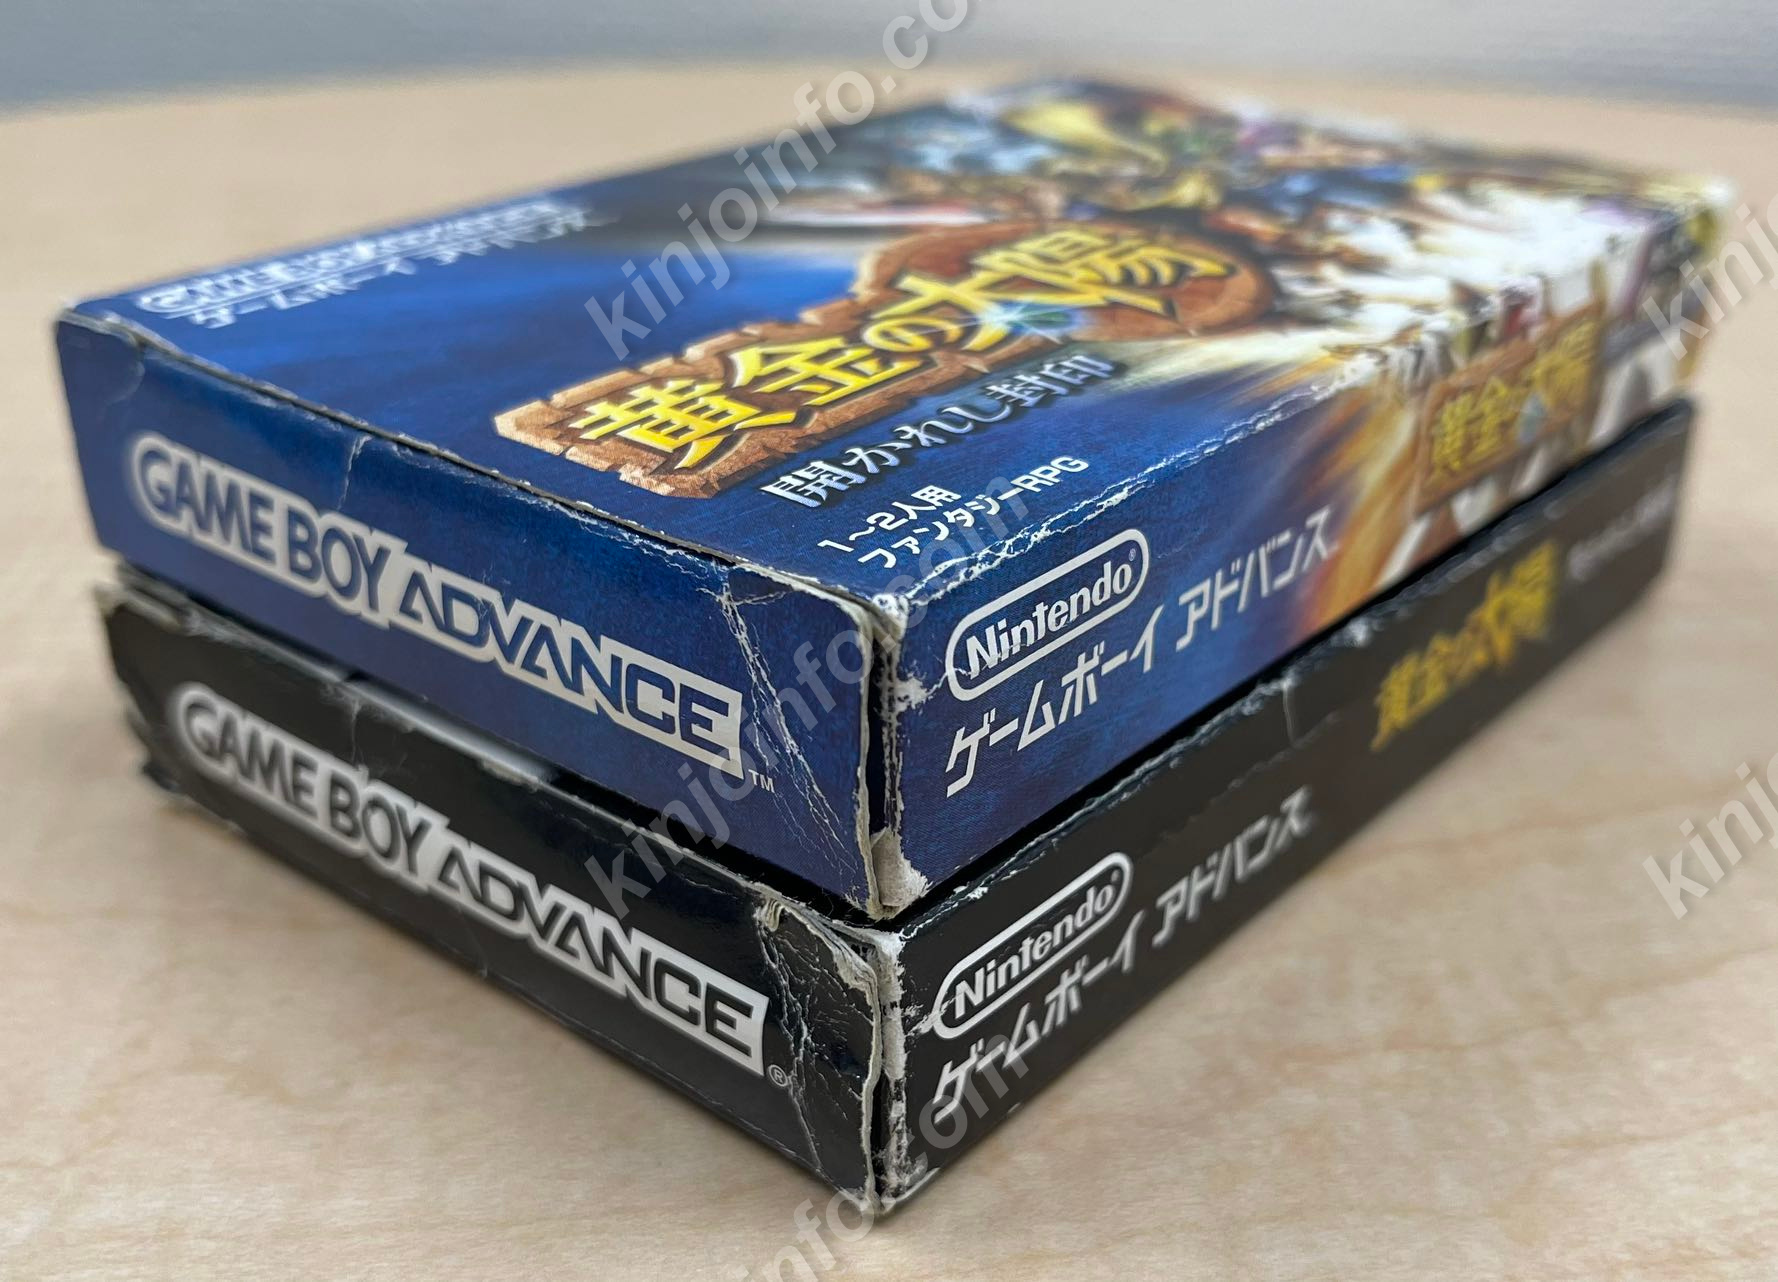 GBA 黄金の太陽 箱説マップ付き2本セットOther - 携帯用ゲームソフト